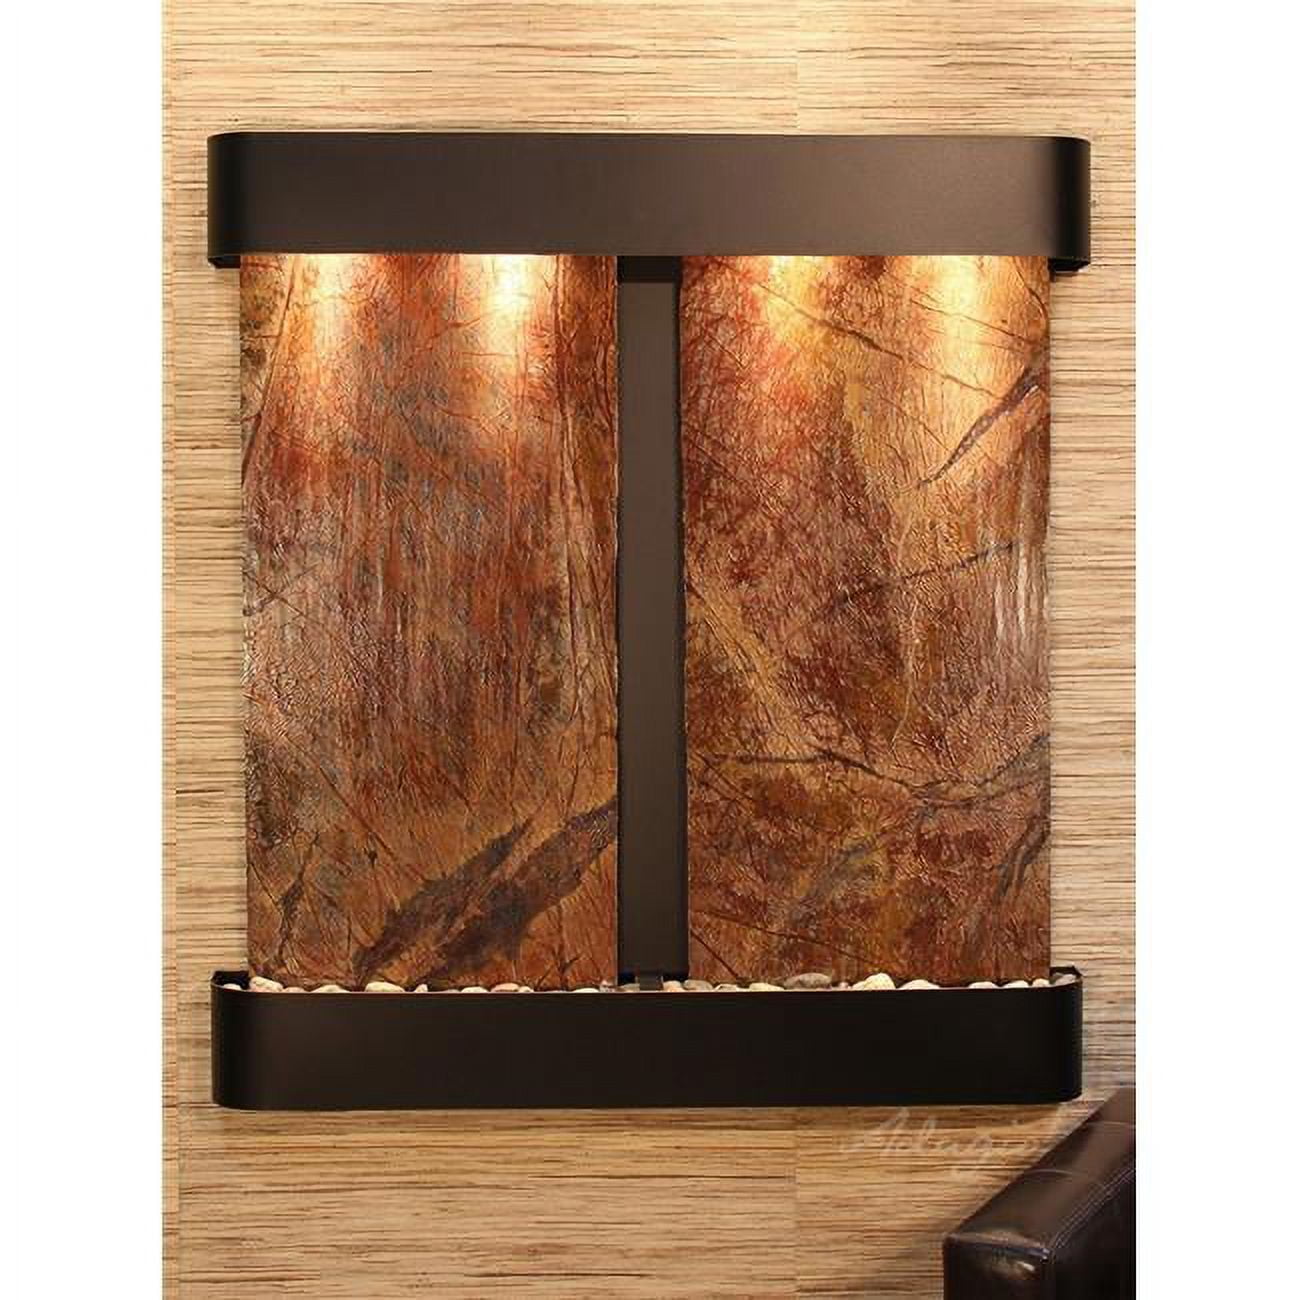 Picture of Adagio AFR1506 Aspen Falls Round Wall Fountain - Blackened Copper-Brown Marble